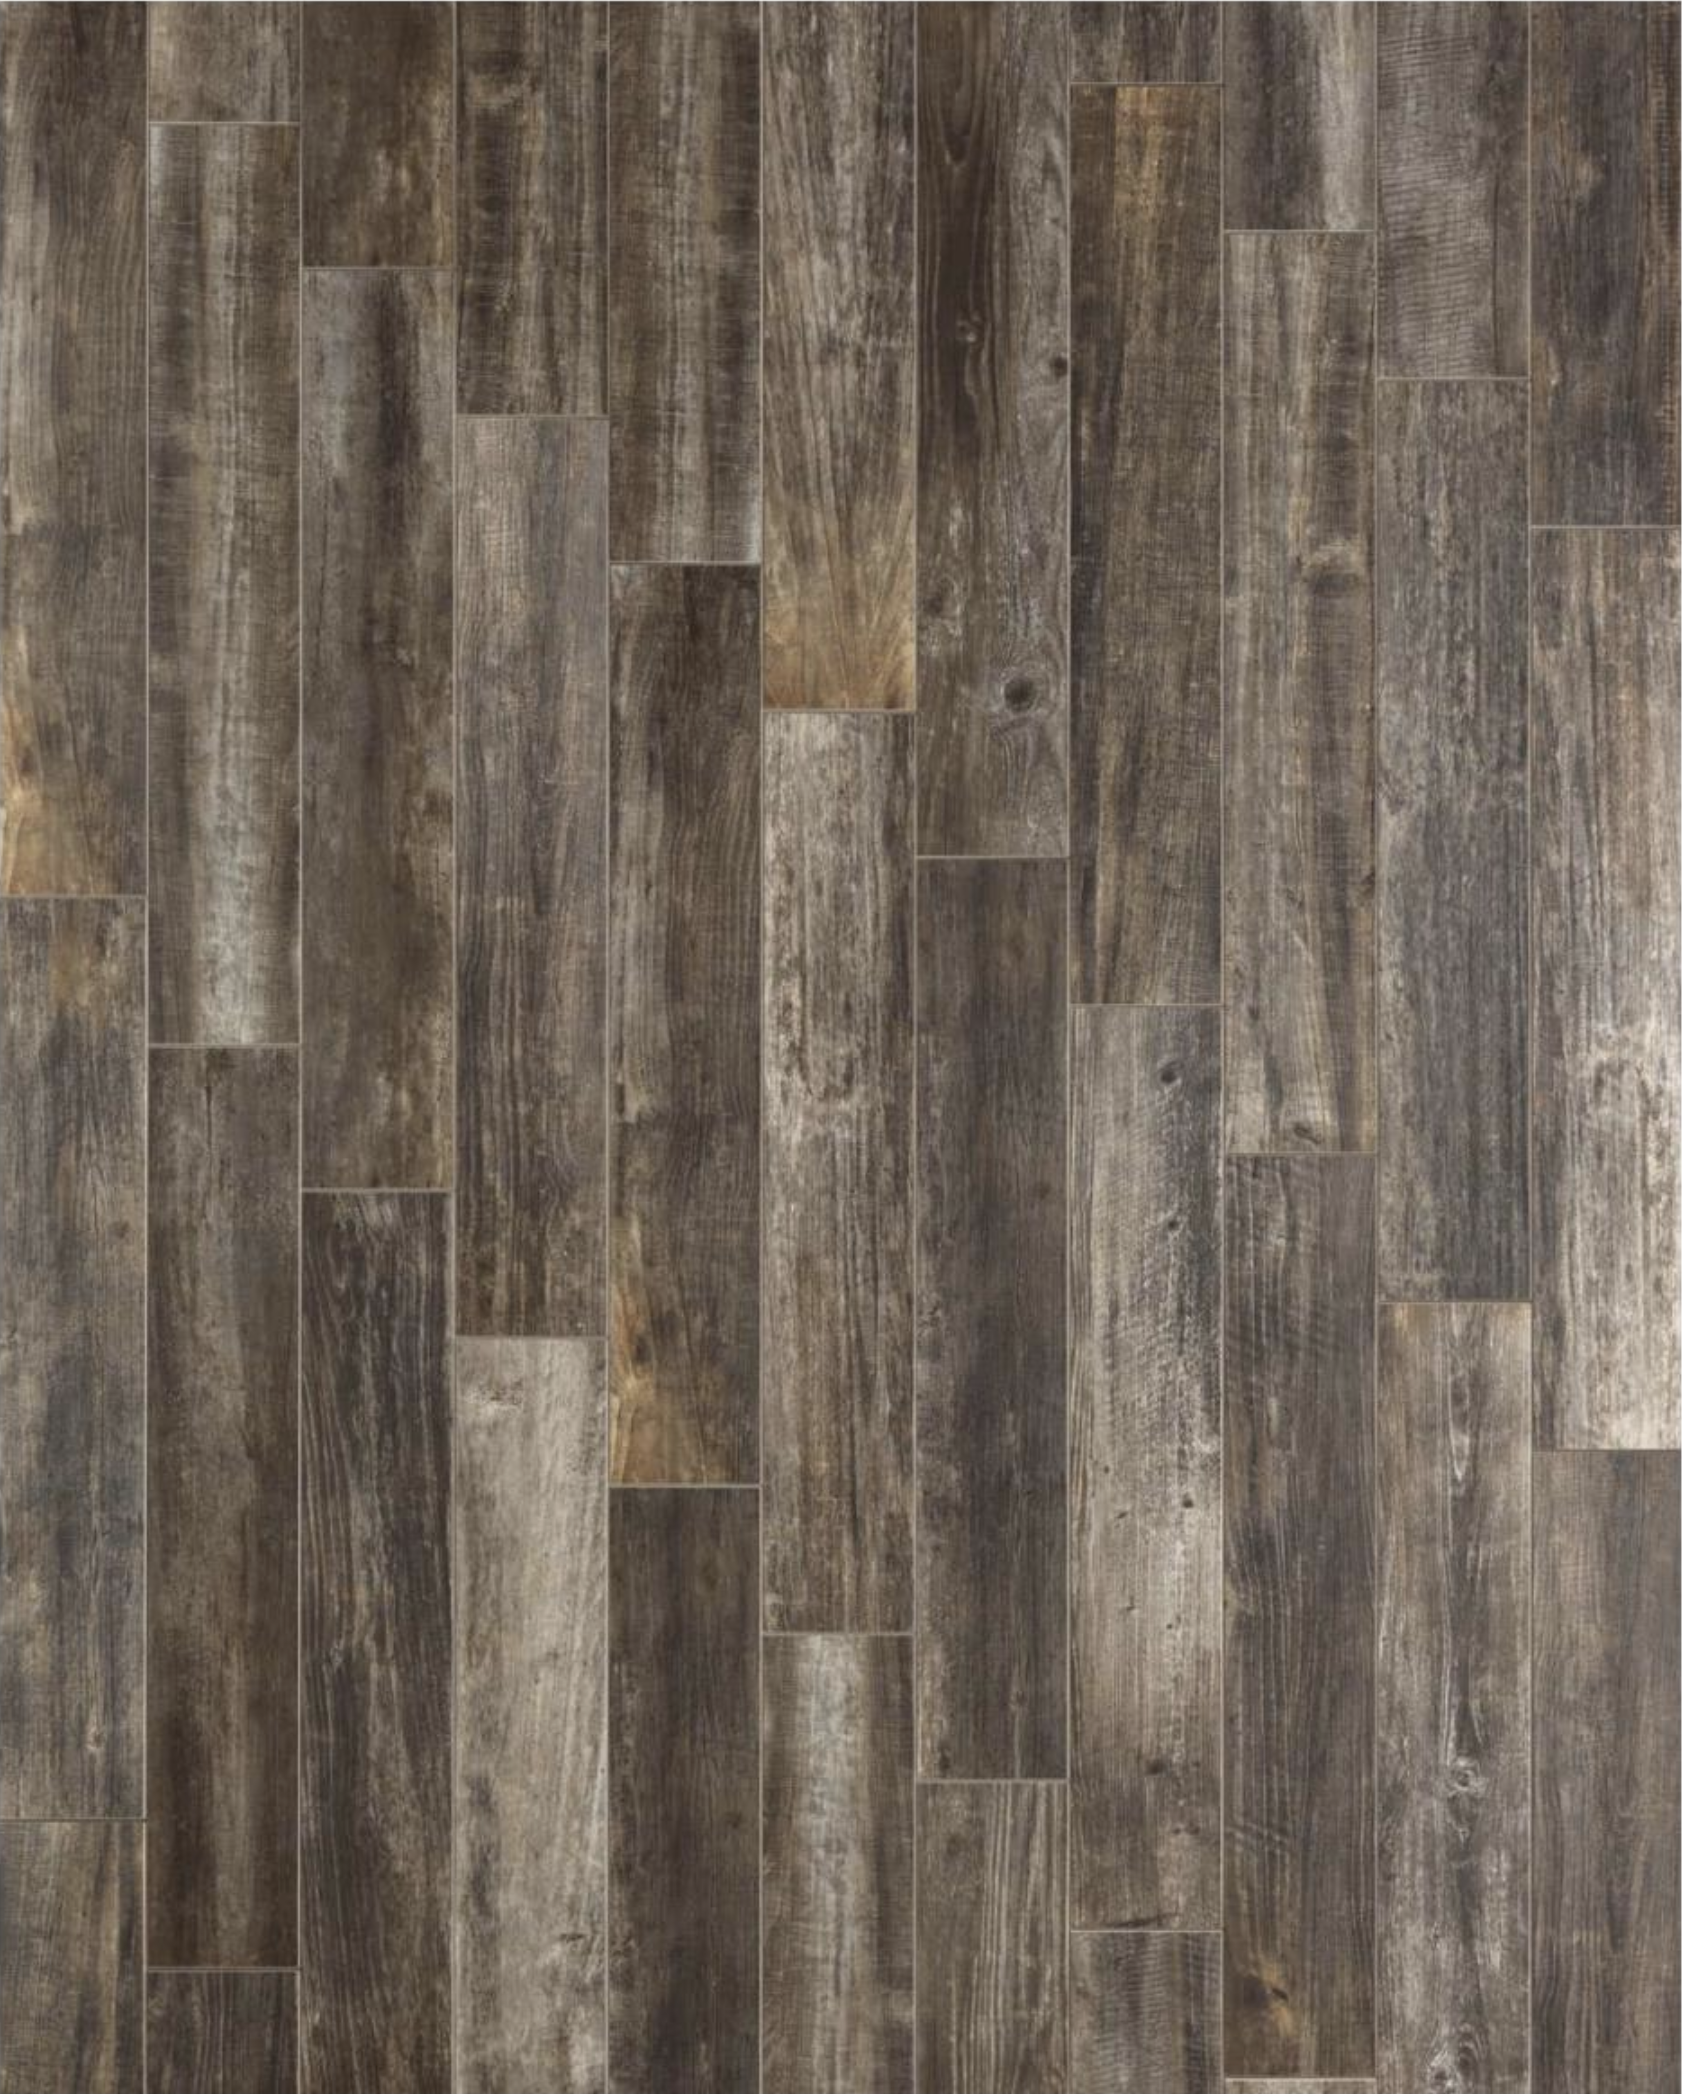 Antracite - a dark brown with high contrast light brown and beige patterns